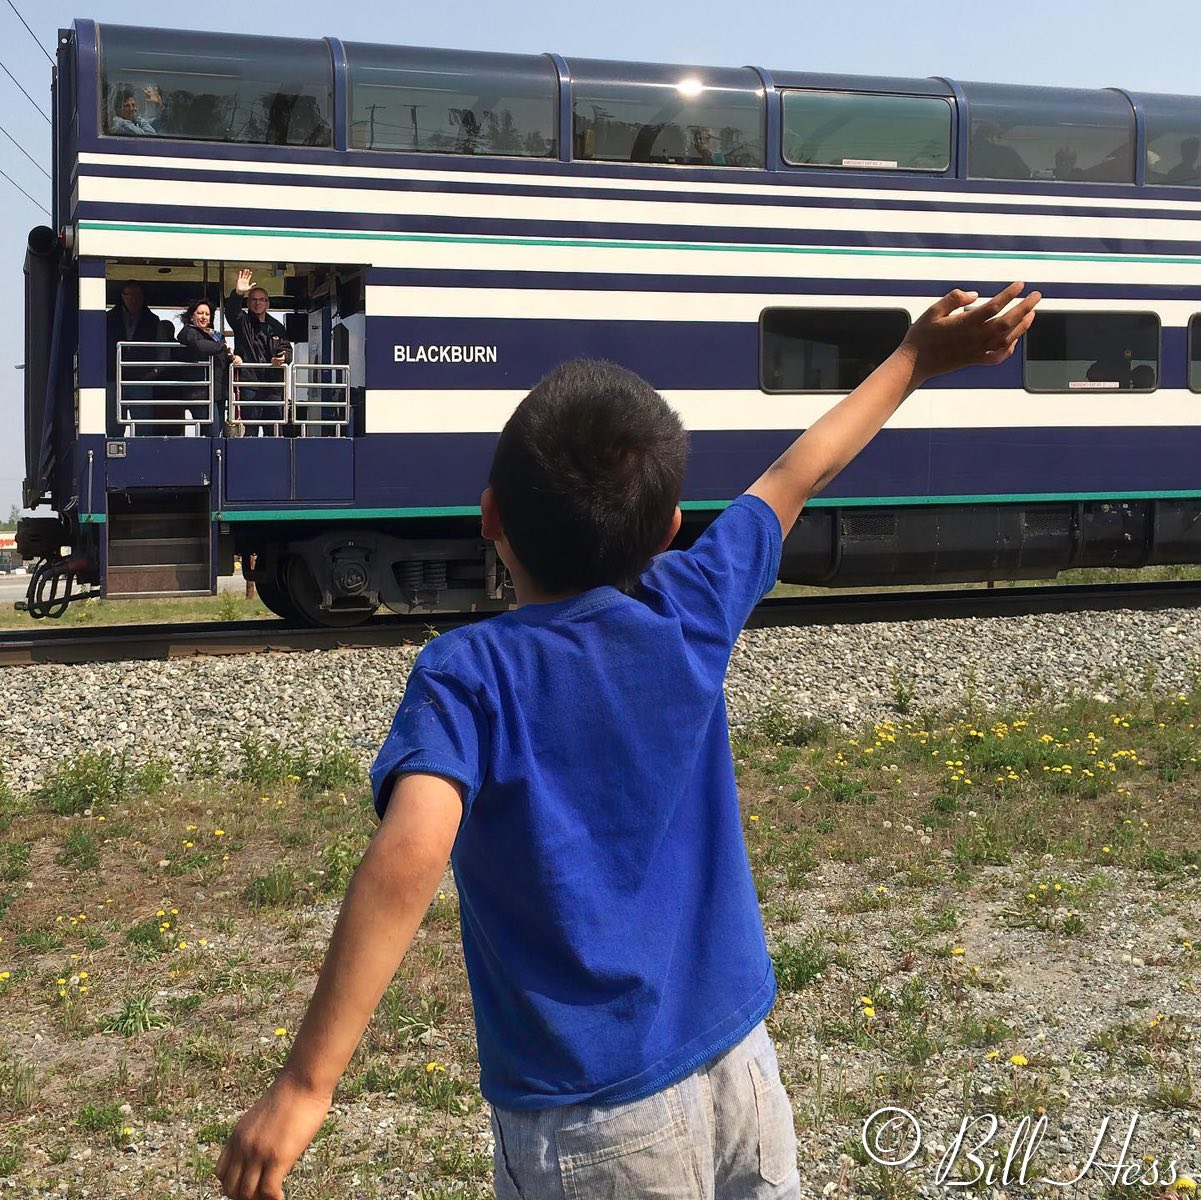 BH-the-boy-who-loved-trains